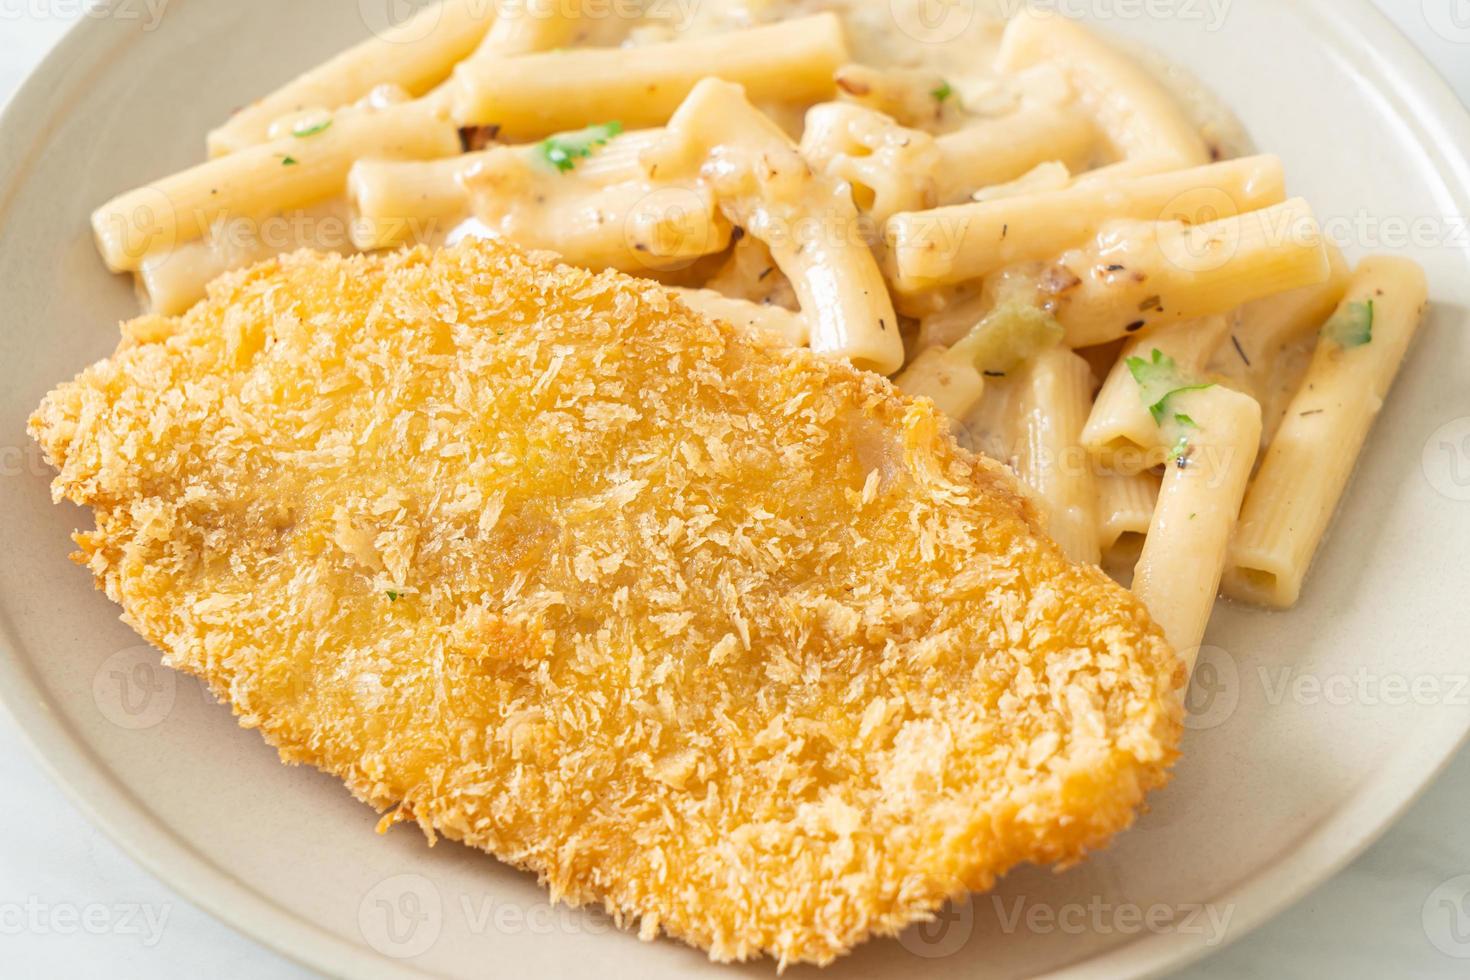 Homemade quadrotto penne pasta white cream sauce with fried fish photo